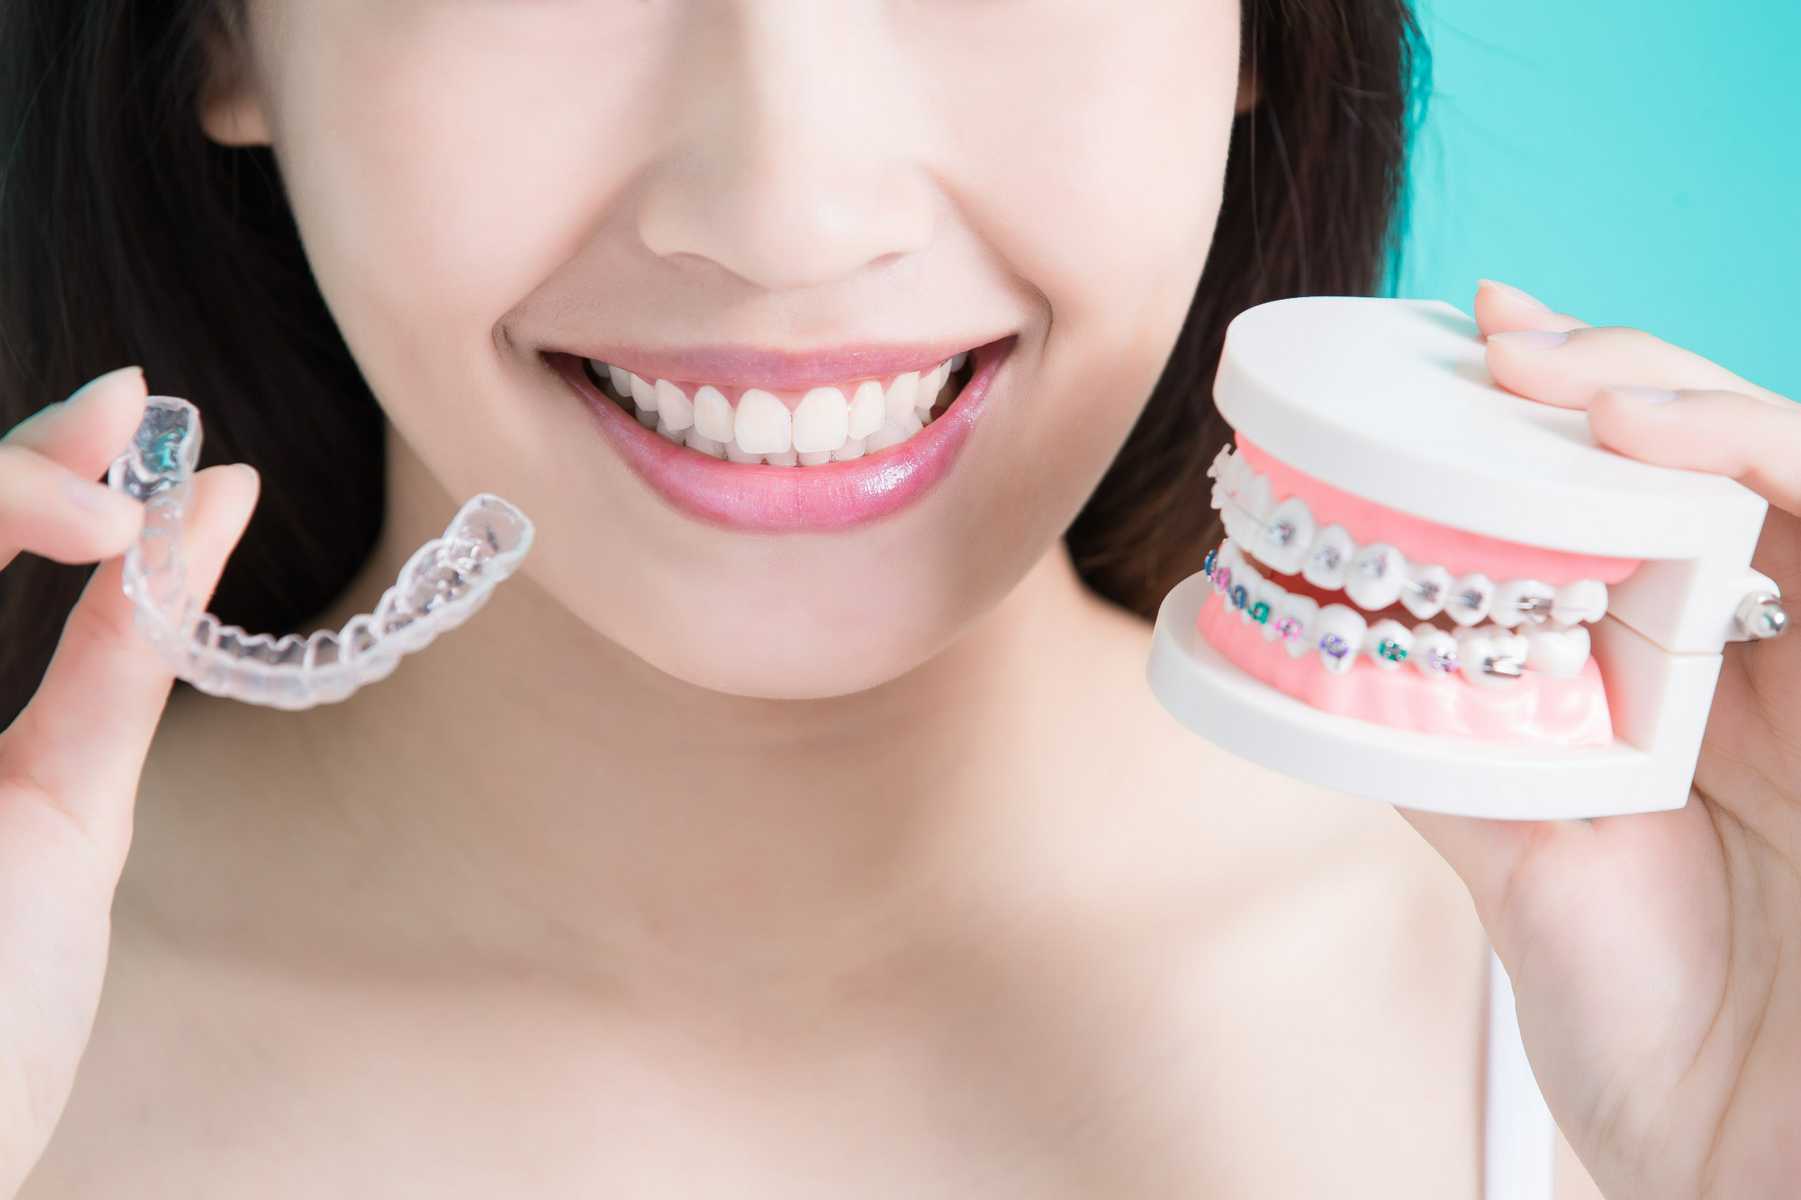 Metal Braces vs. Invisalign: Which Is Best?